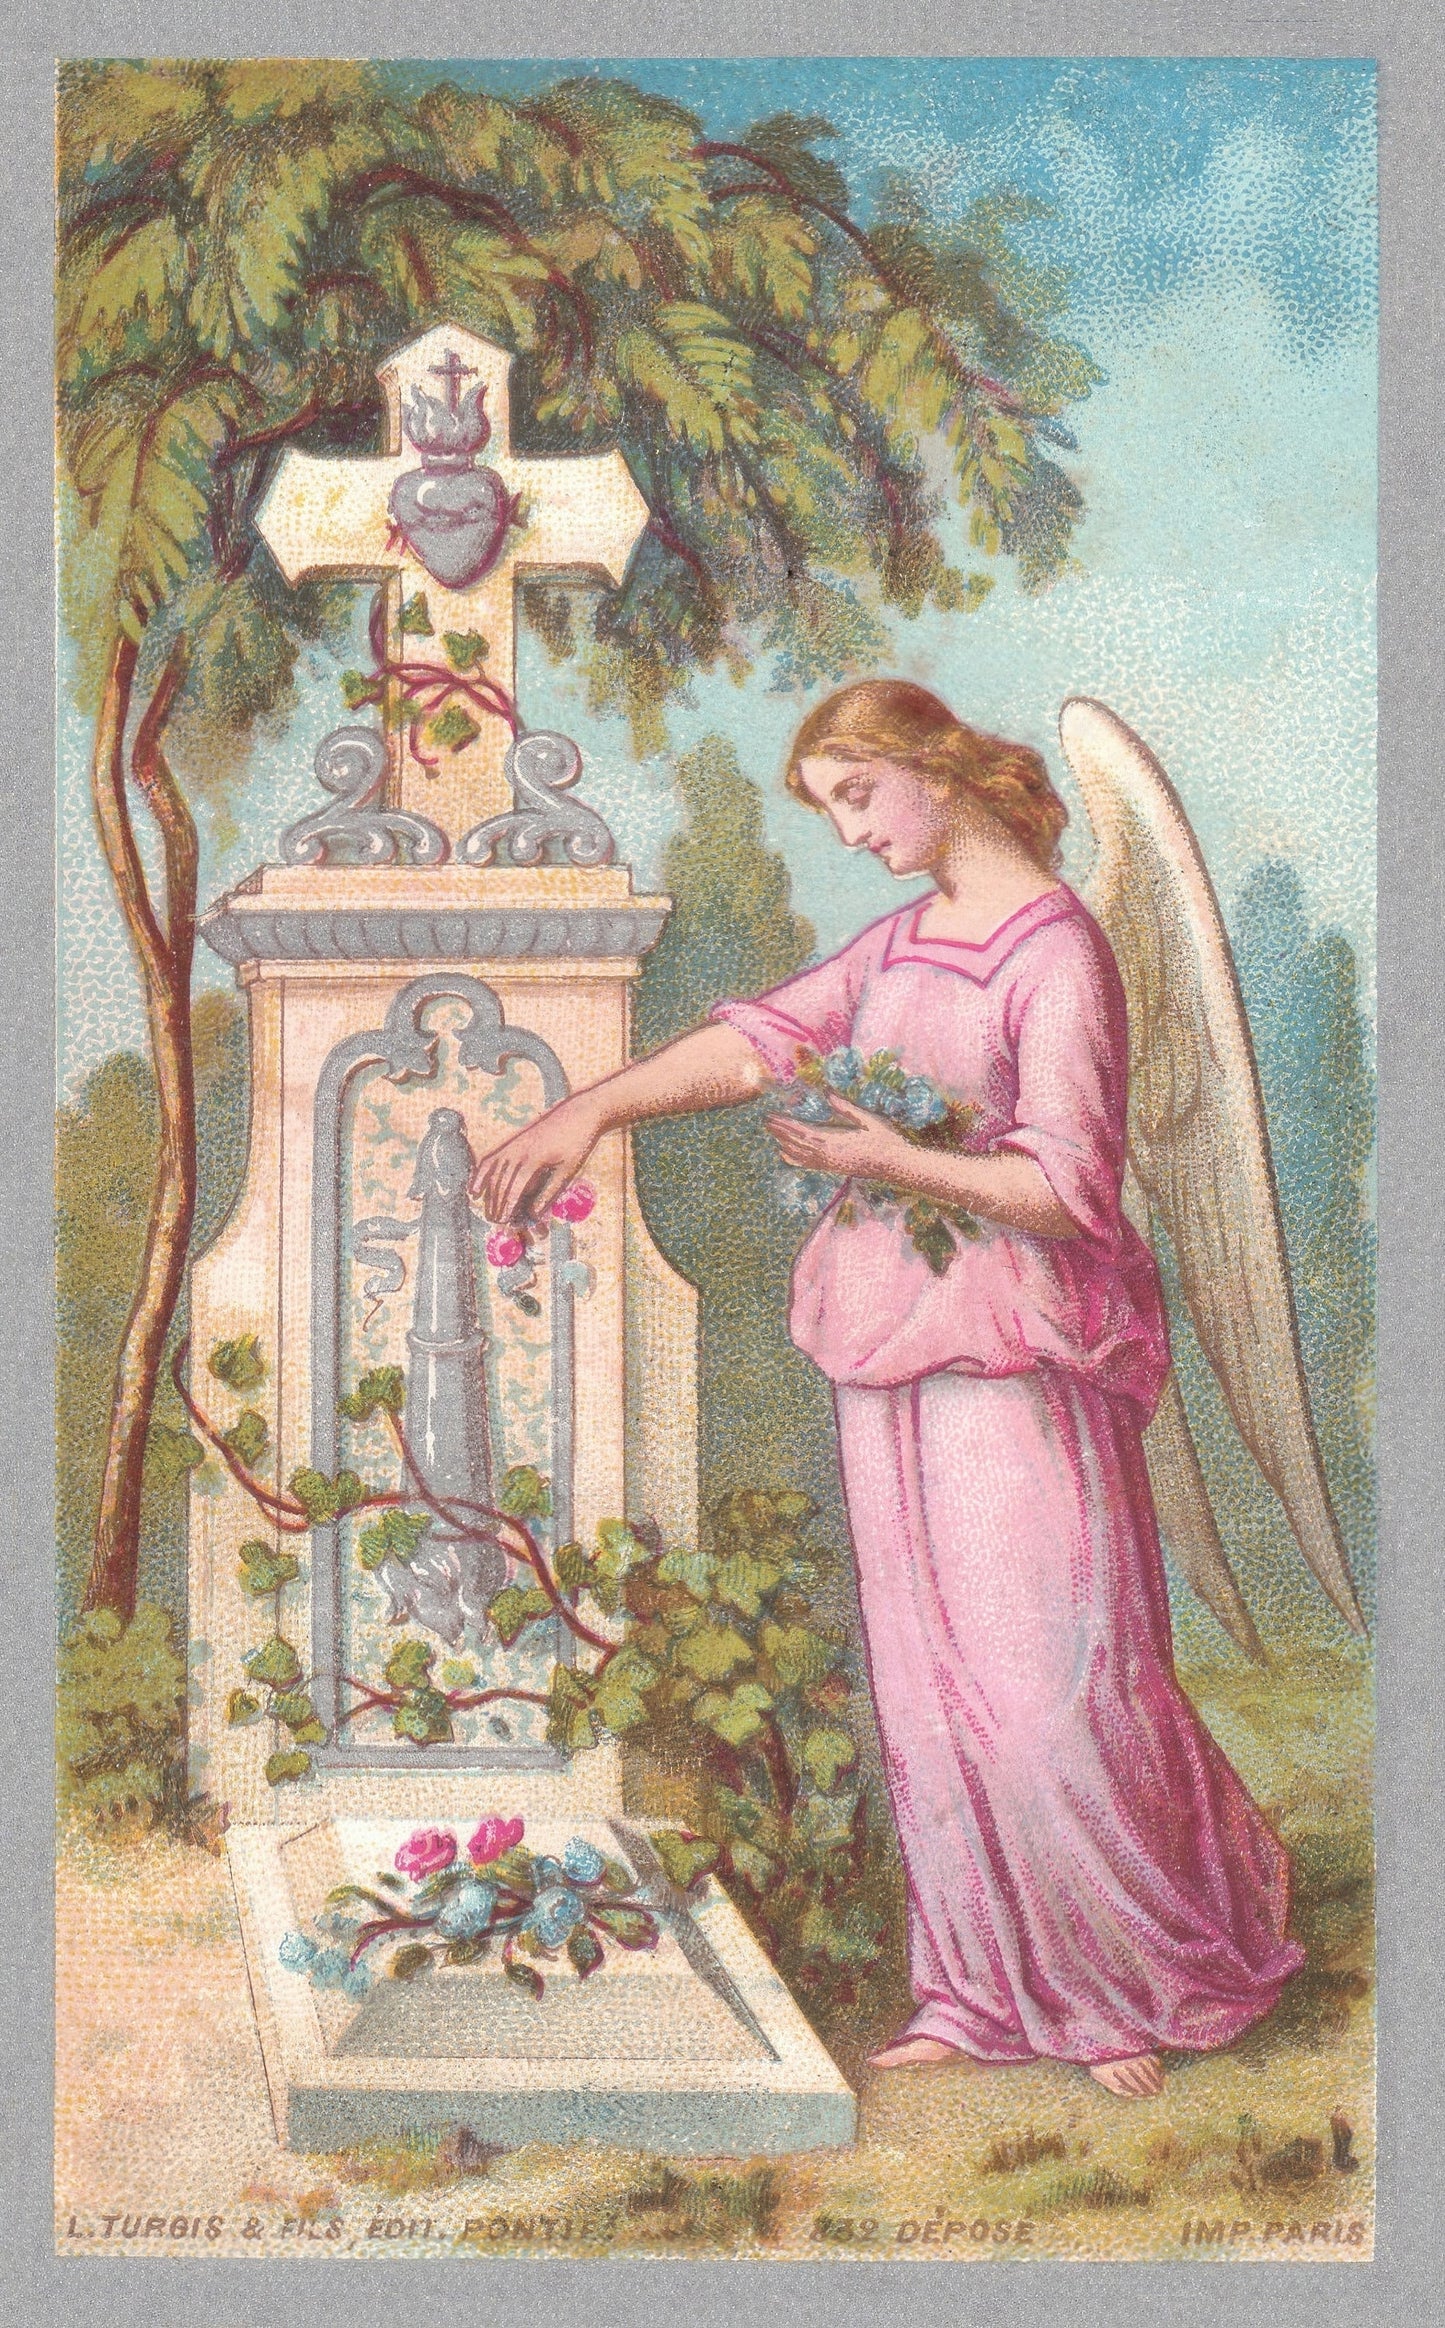 New! Prayer for the Dead – Memorial Card – Angel at the Graveside – Restored Vintage Holy Card / Funeral Card – pack of 10/100/1000